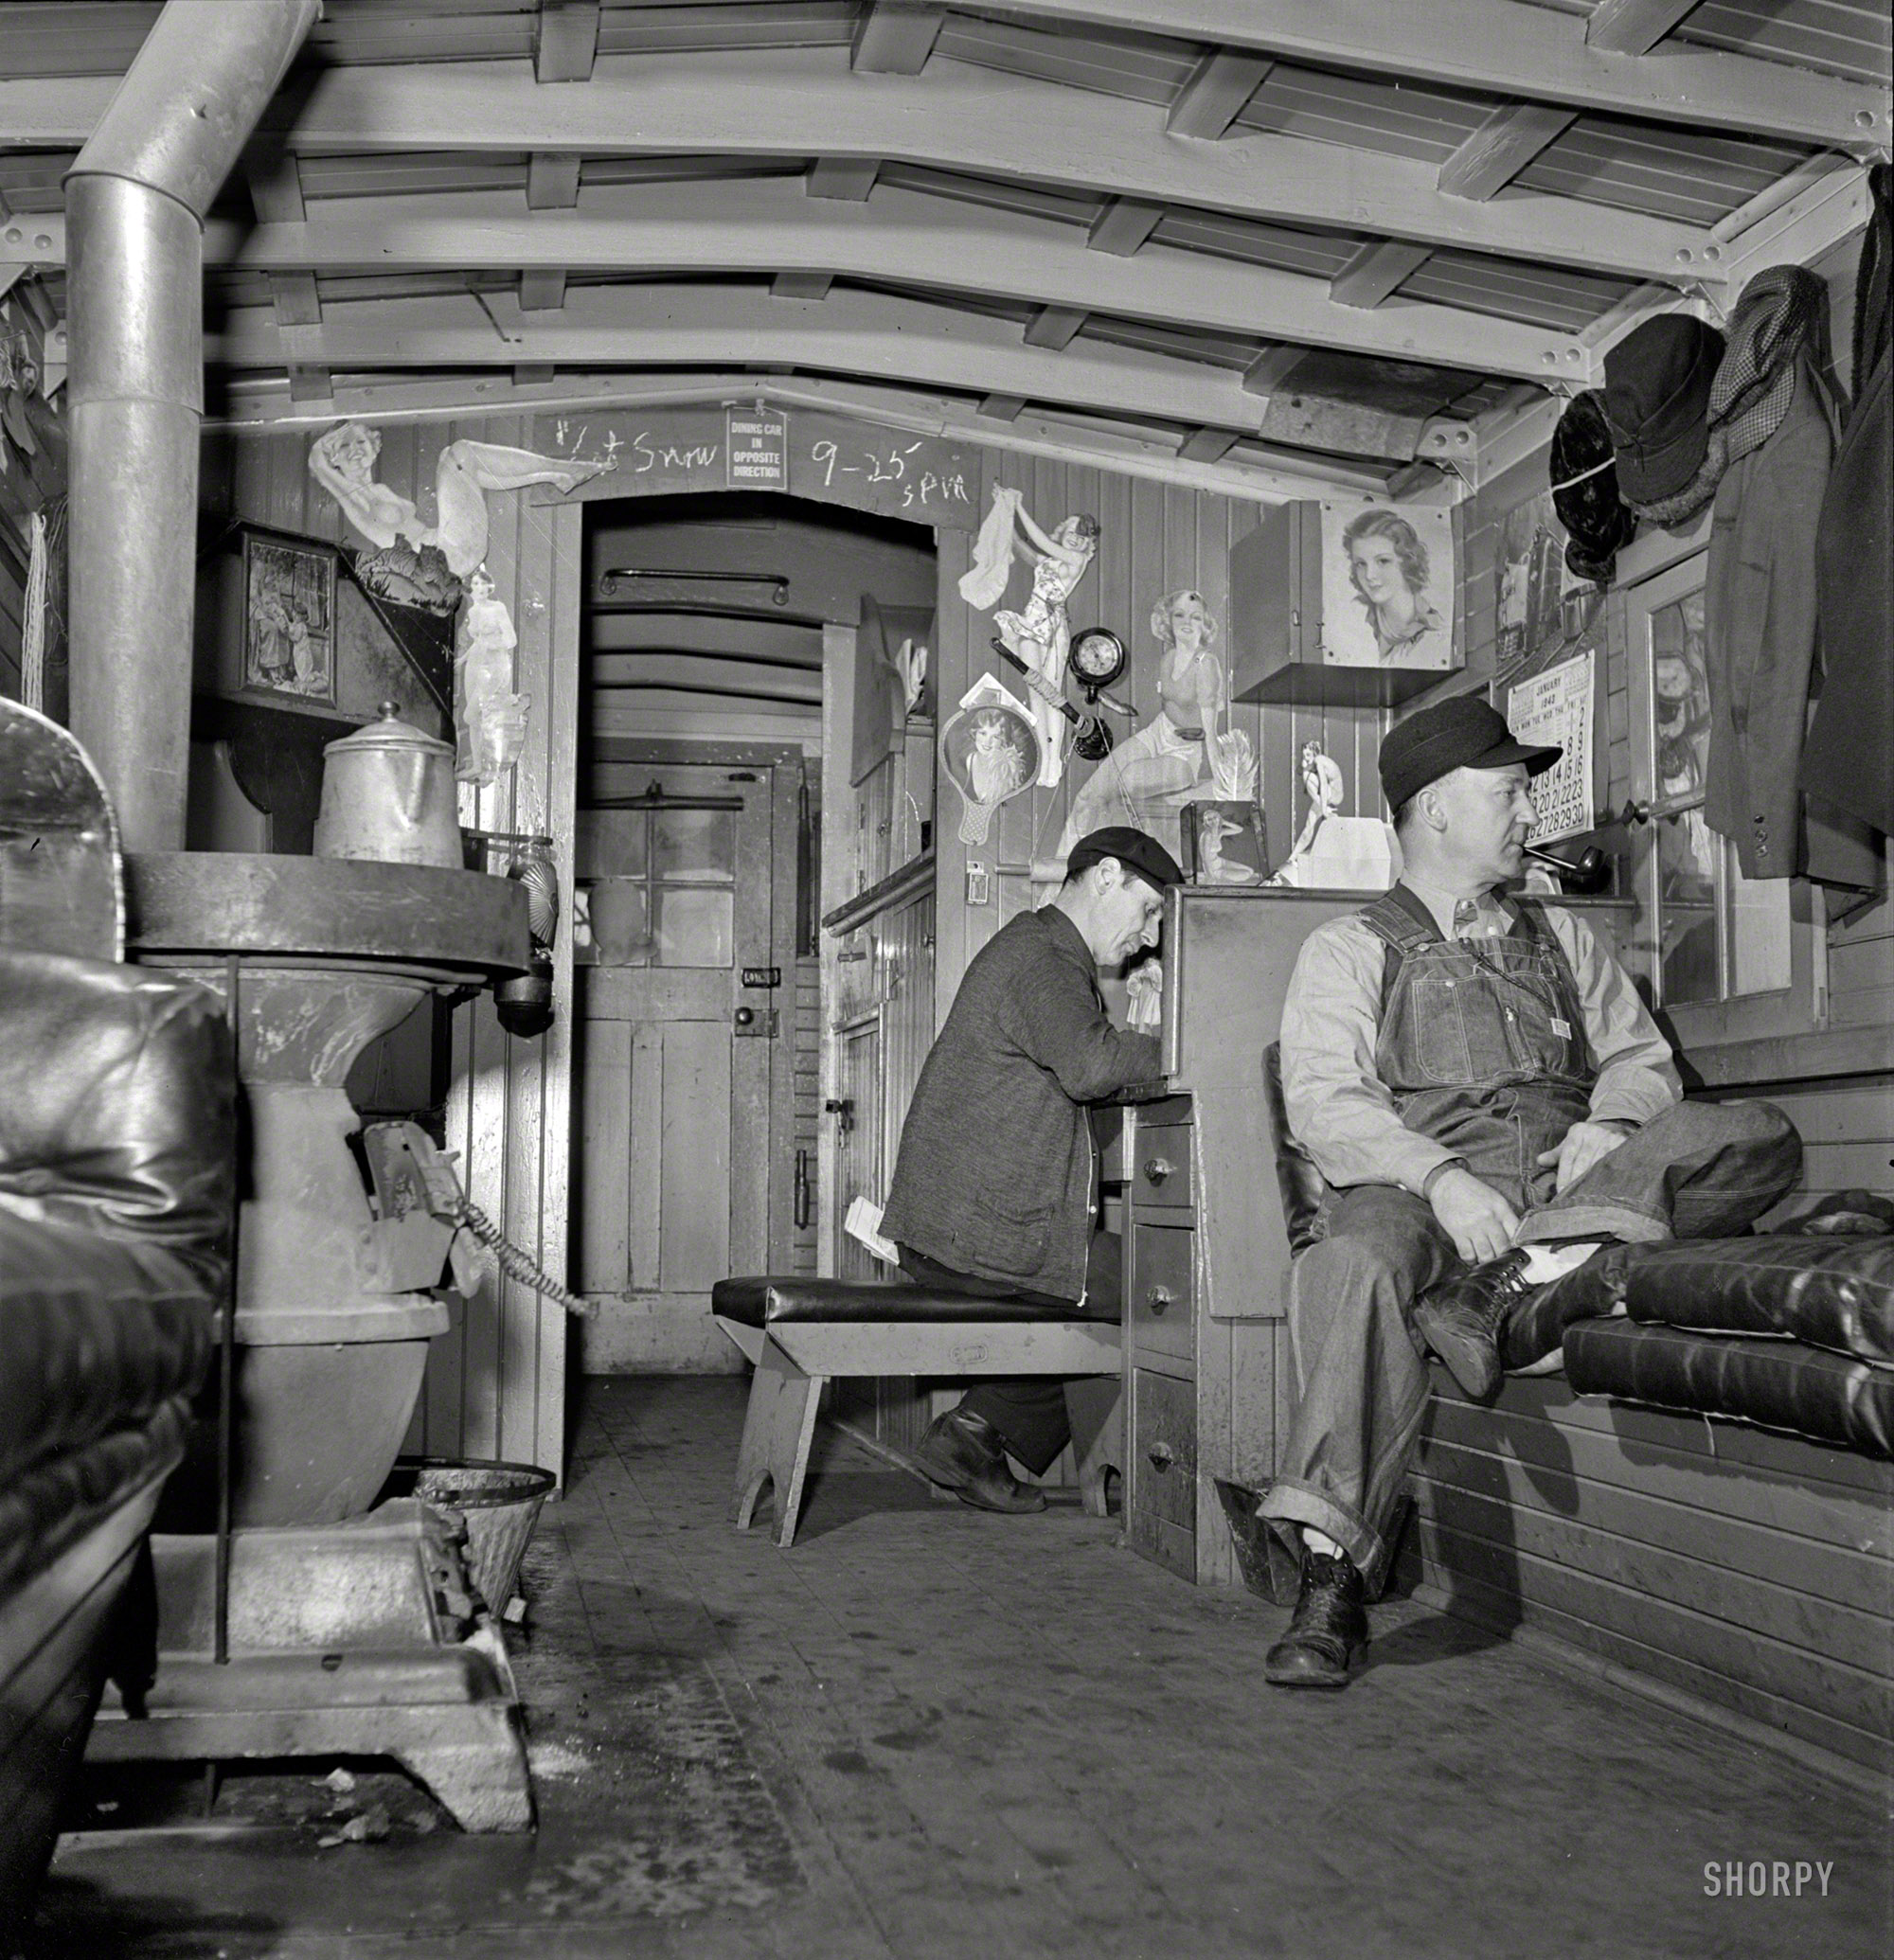 January 1943. "Freight train operations on the Chicago & North Western Railroad between Chicago and Clinton, Iowa. The caboose is the conductor's second home. He always uses the same one and many conductors cook and sleep there while waiting for trains to take back from division points." Medium-format negative by Jack Delano for the Office of War Information. View full size.